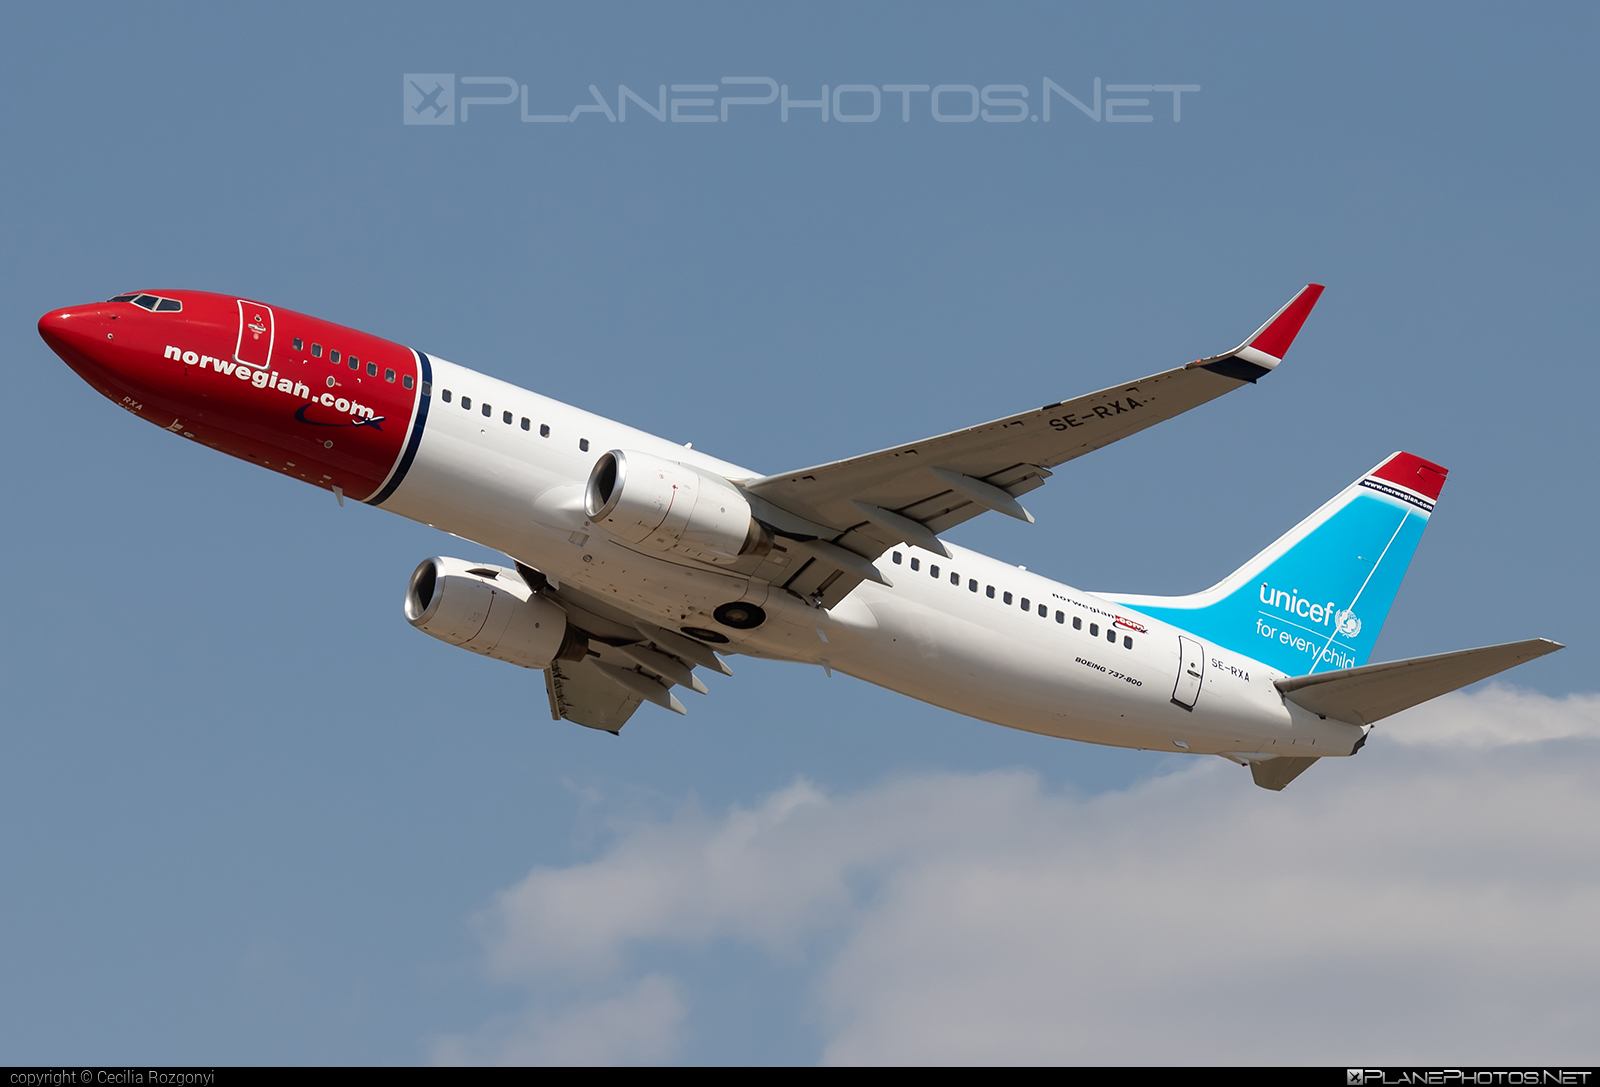 Boeing 737-800 - SE-RXA operated by Norwegian Air Shuttle #b737 #b737nextgen #b737ng #boeing #boeing737 #norwegian #norwegianair #norwegianairshuttle